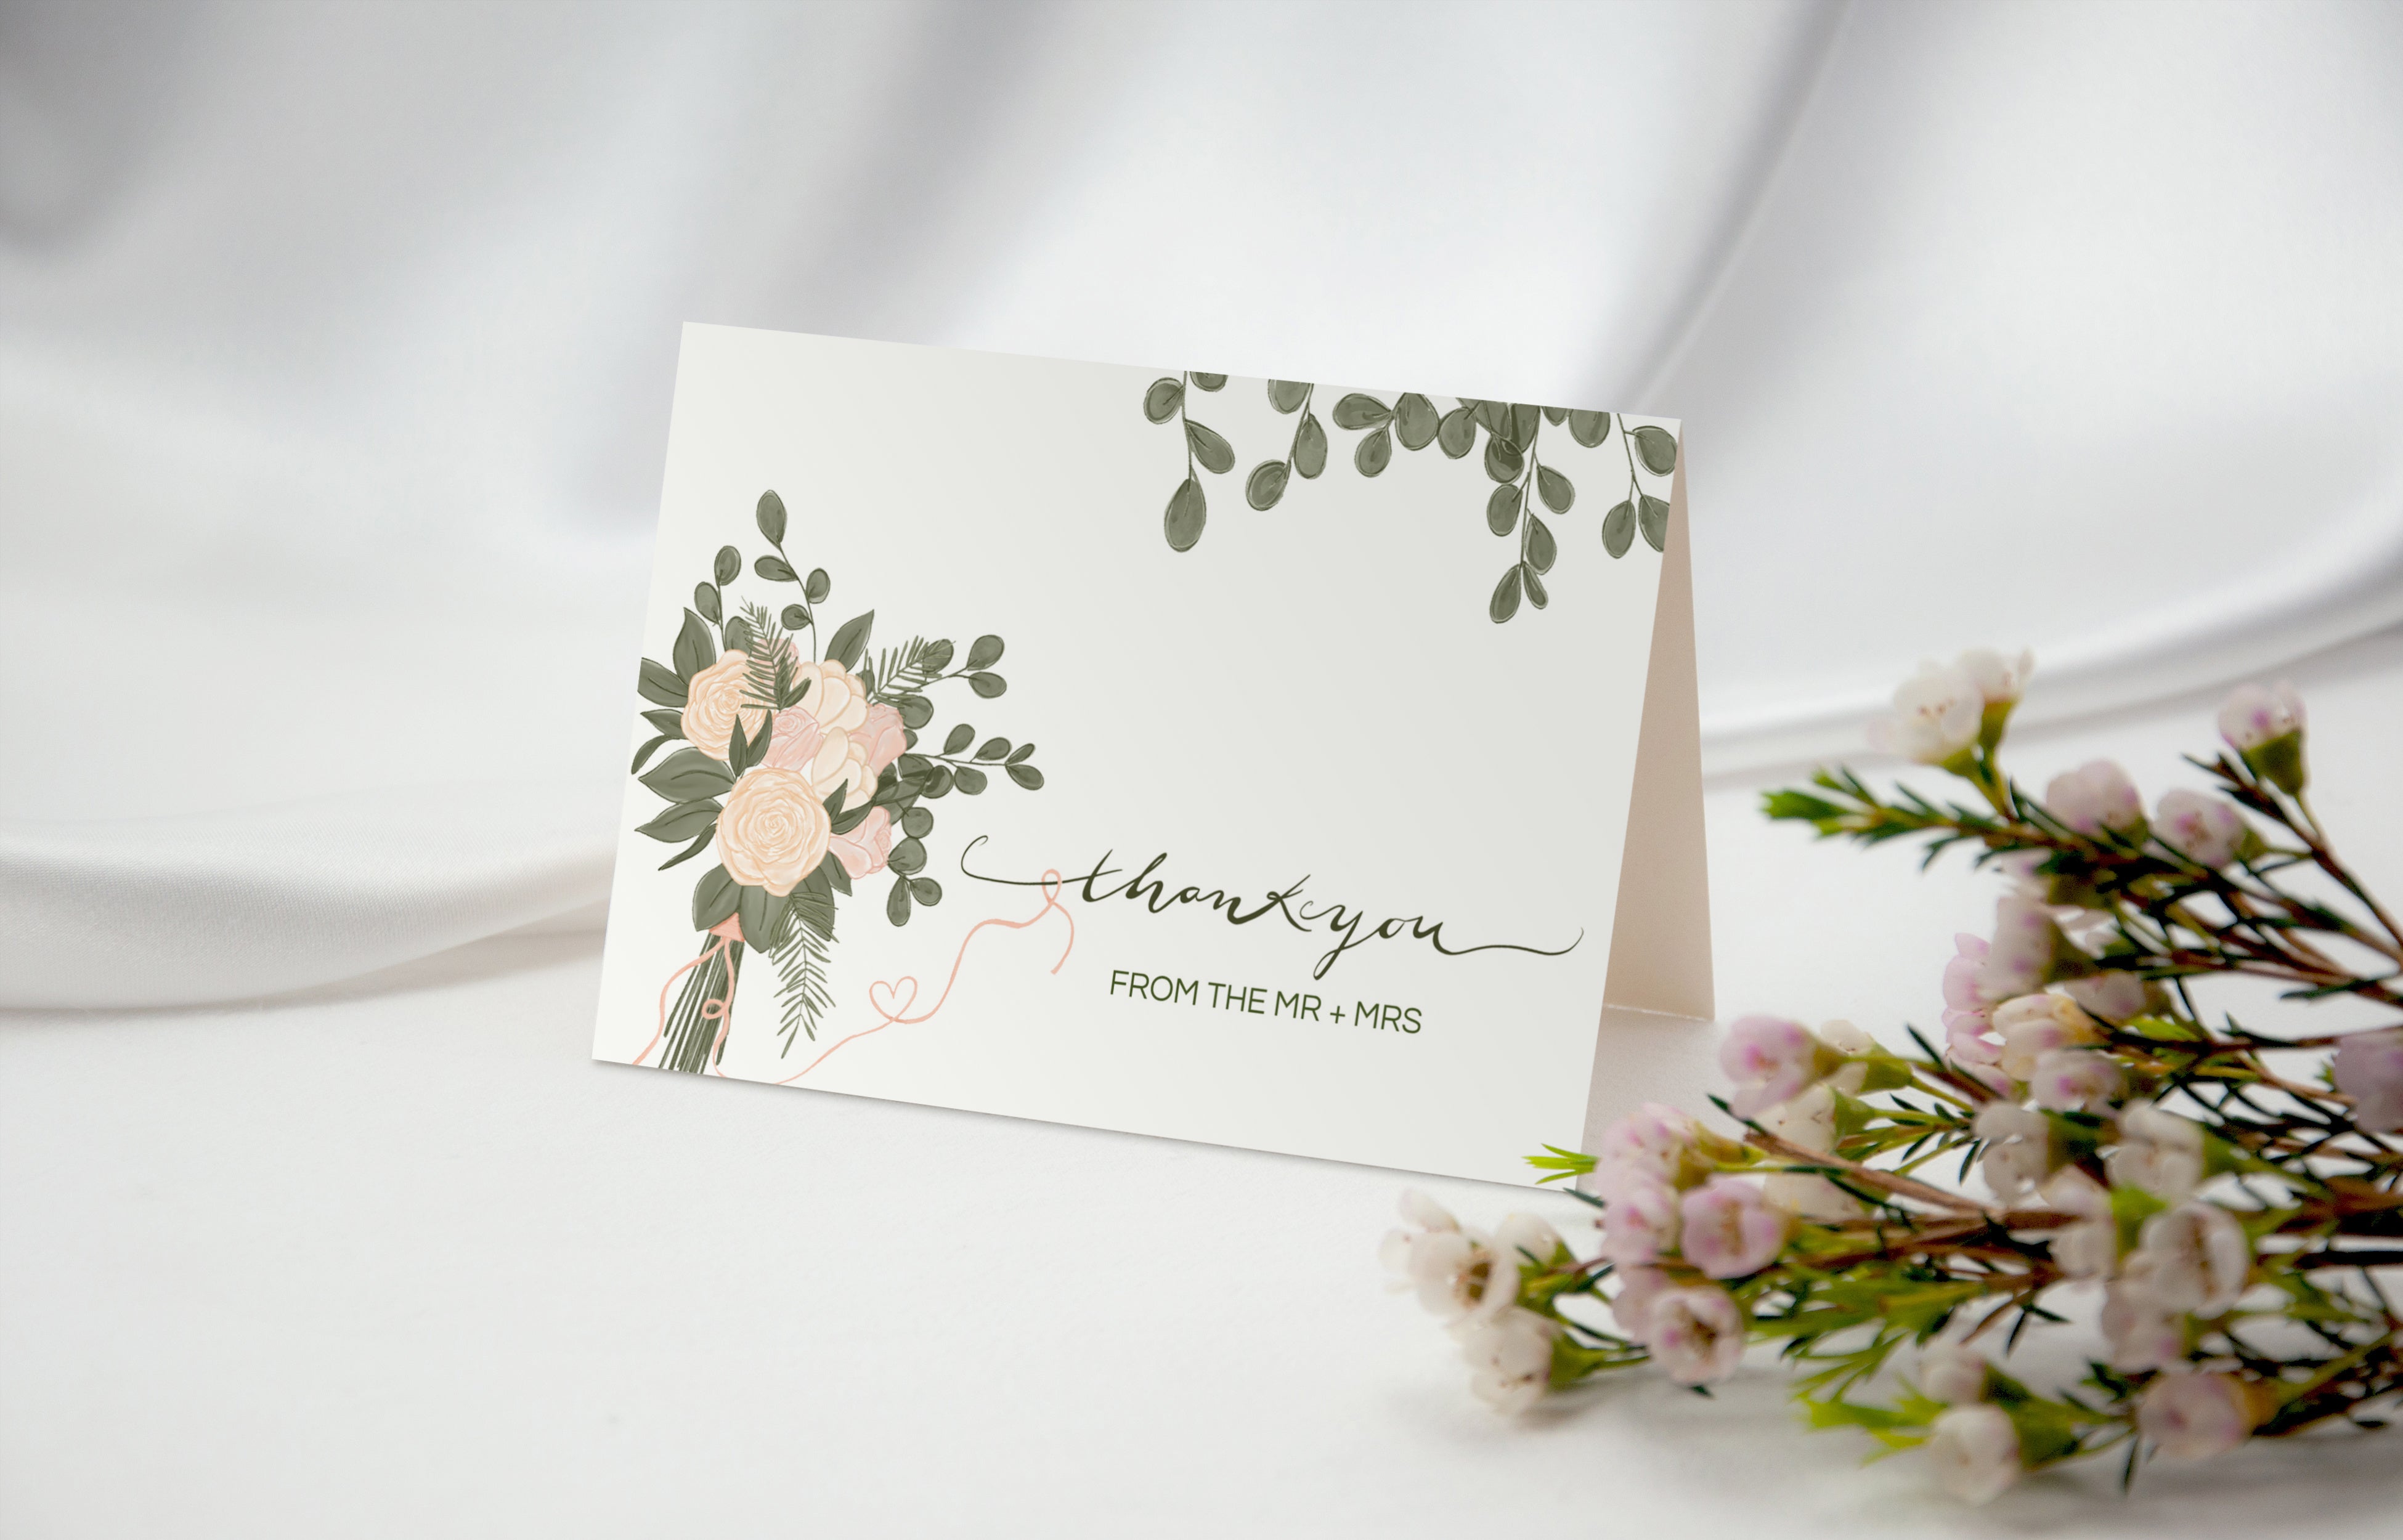 50 Wedding Thank You Cards from the New Mr and Mrs | 4x6 Bulk Thank You Cards with Envelopes | Wedding Shower Beyond Grateful Thank You Notes for Wedding, Bridal Shower and Baby Shower - Eucalyptus